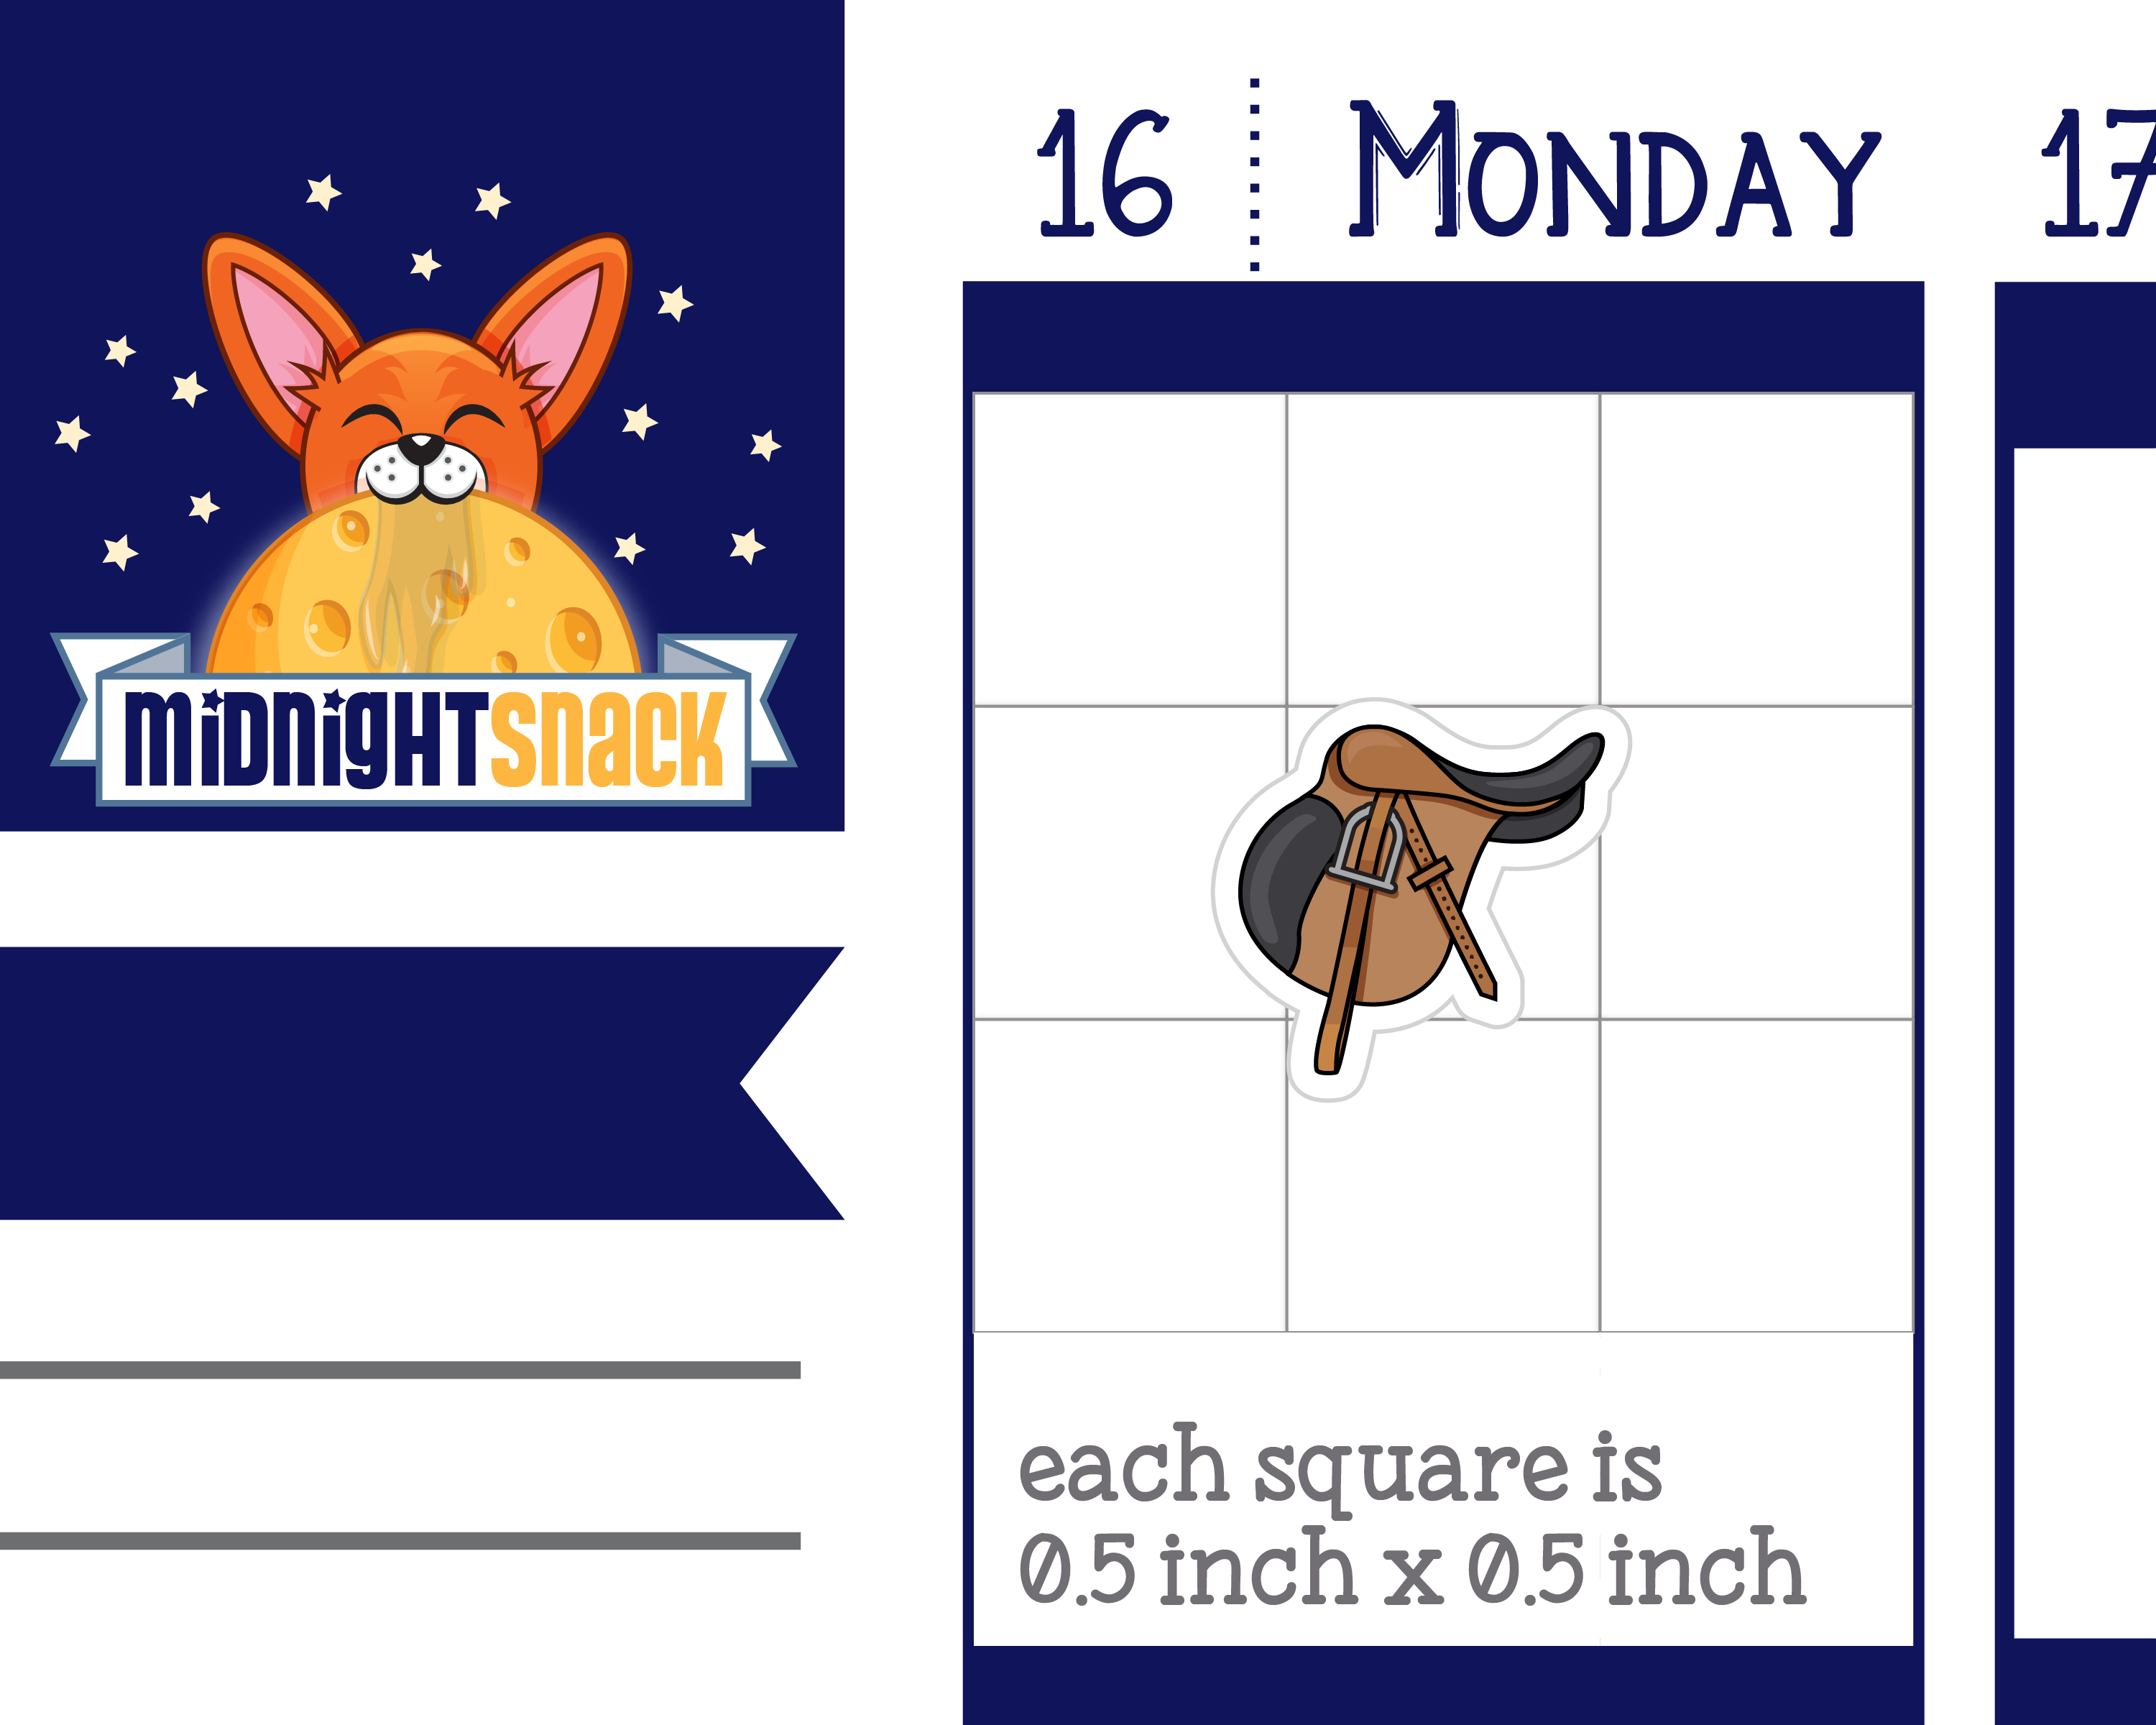 English Saddle Icon: Horse Back Riding Planner Stickers Midnight Snack Planner